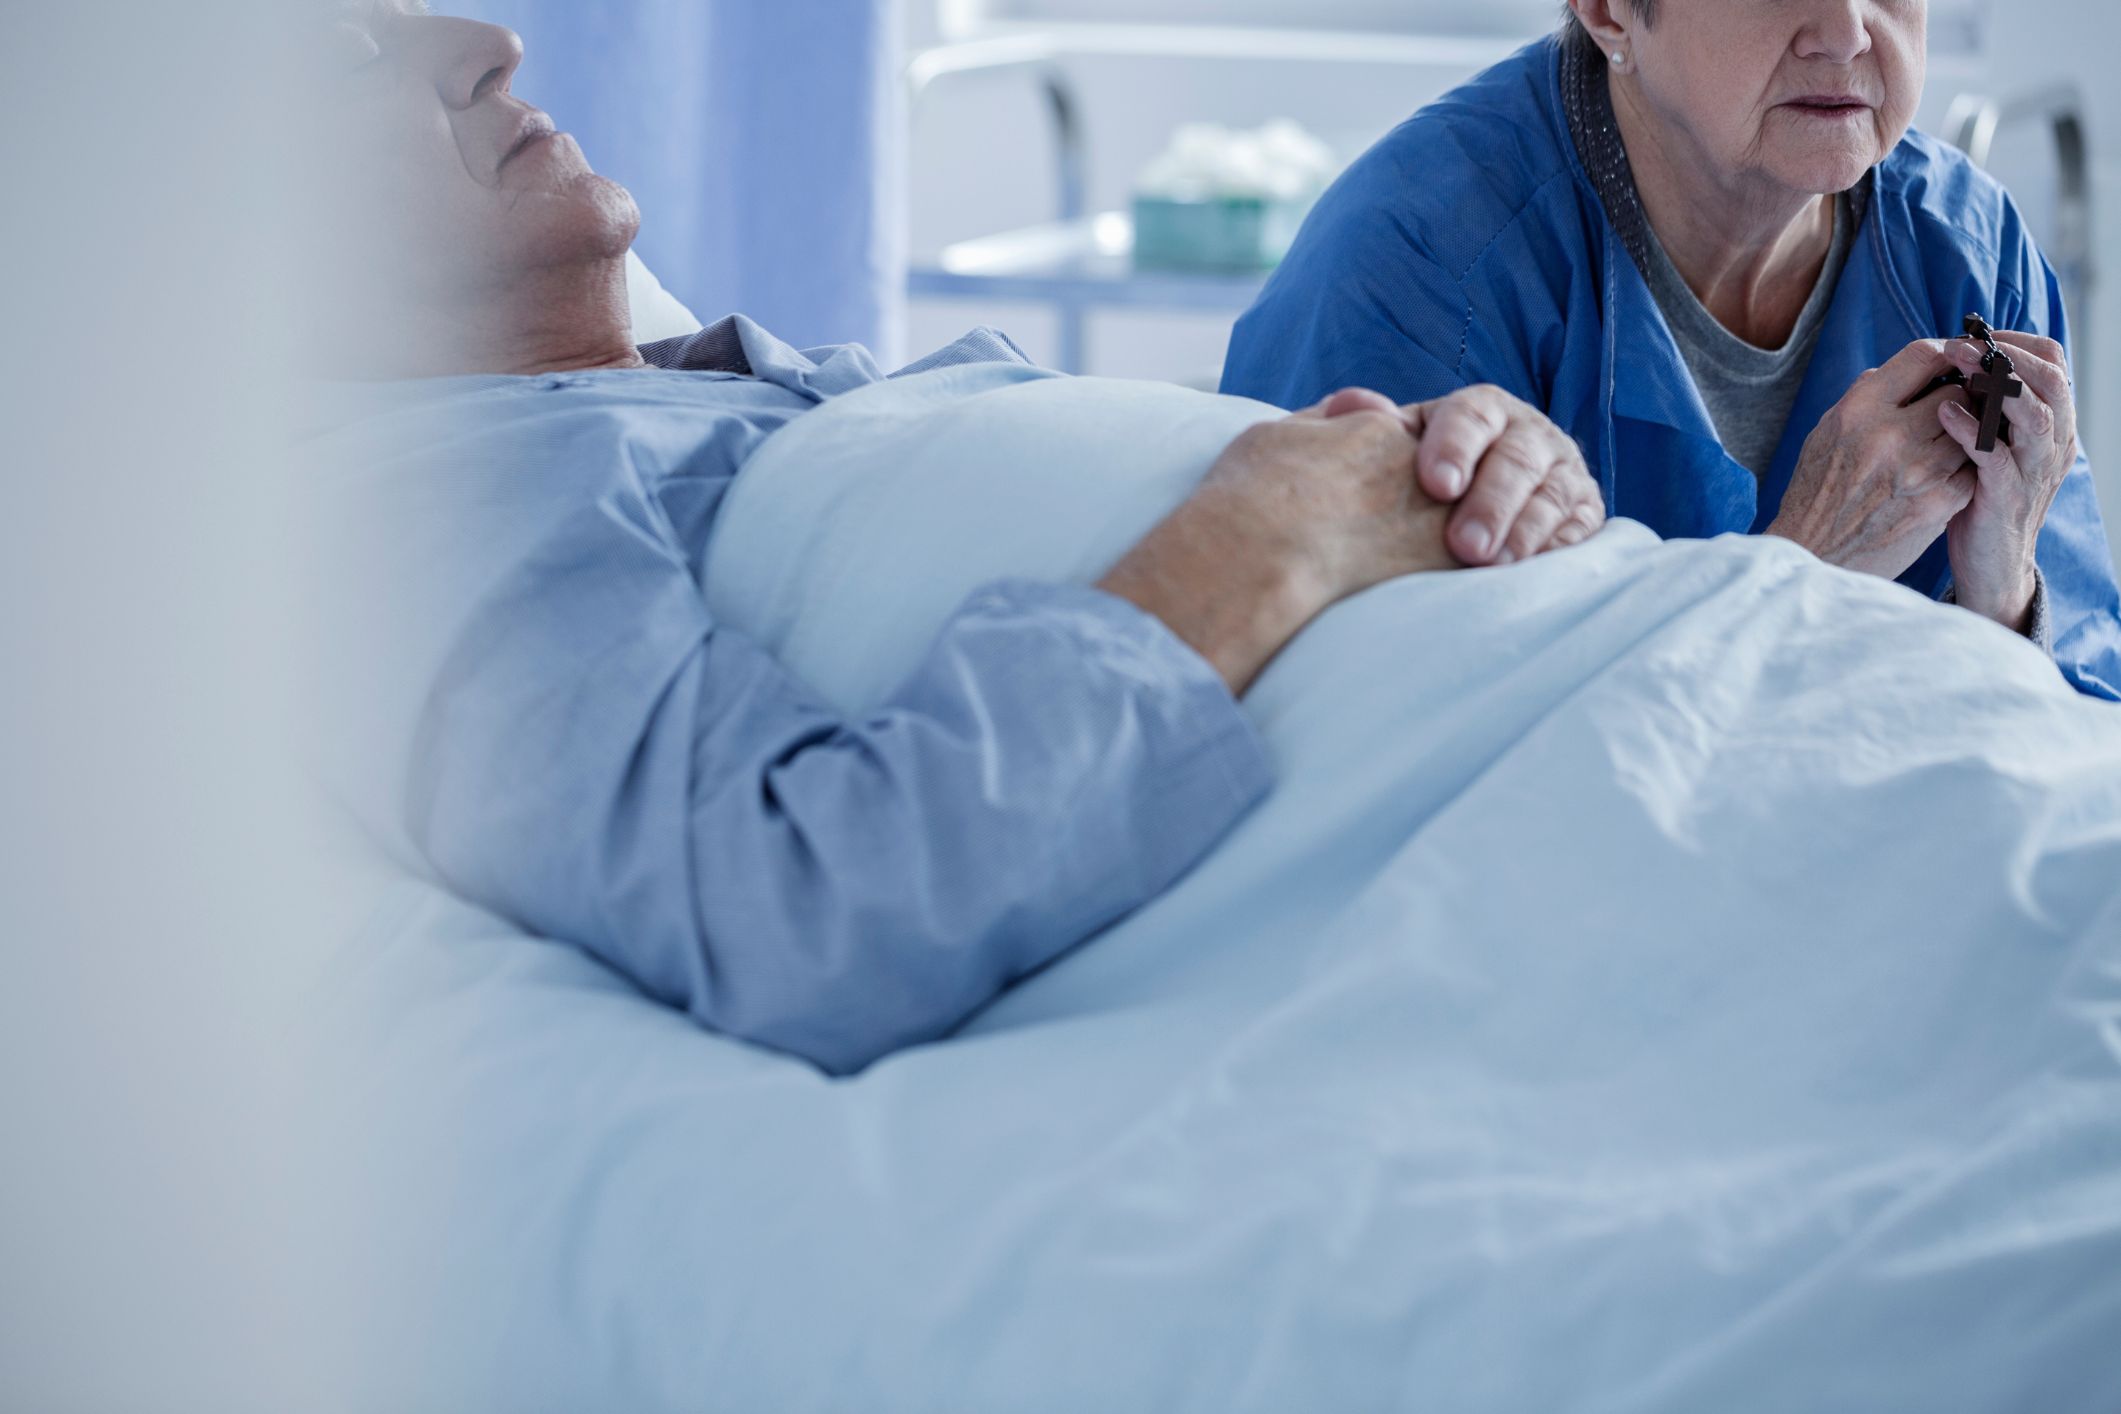 Distressing lack of access to palliative care highlighted in new data